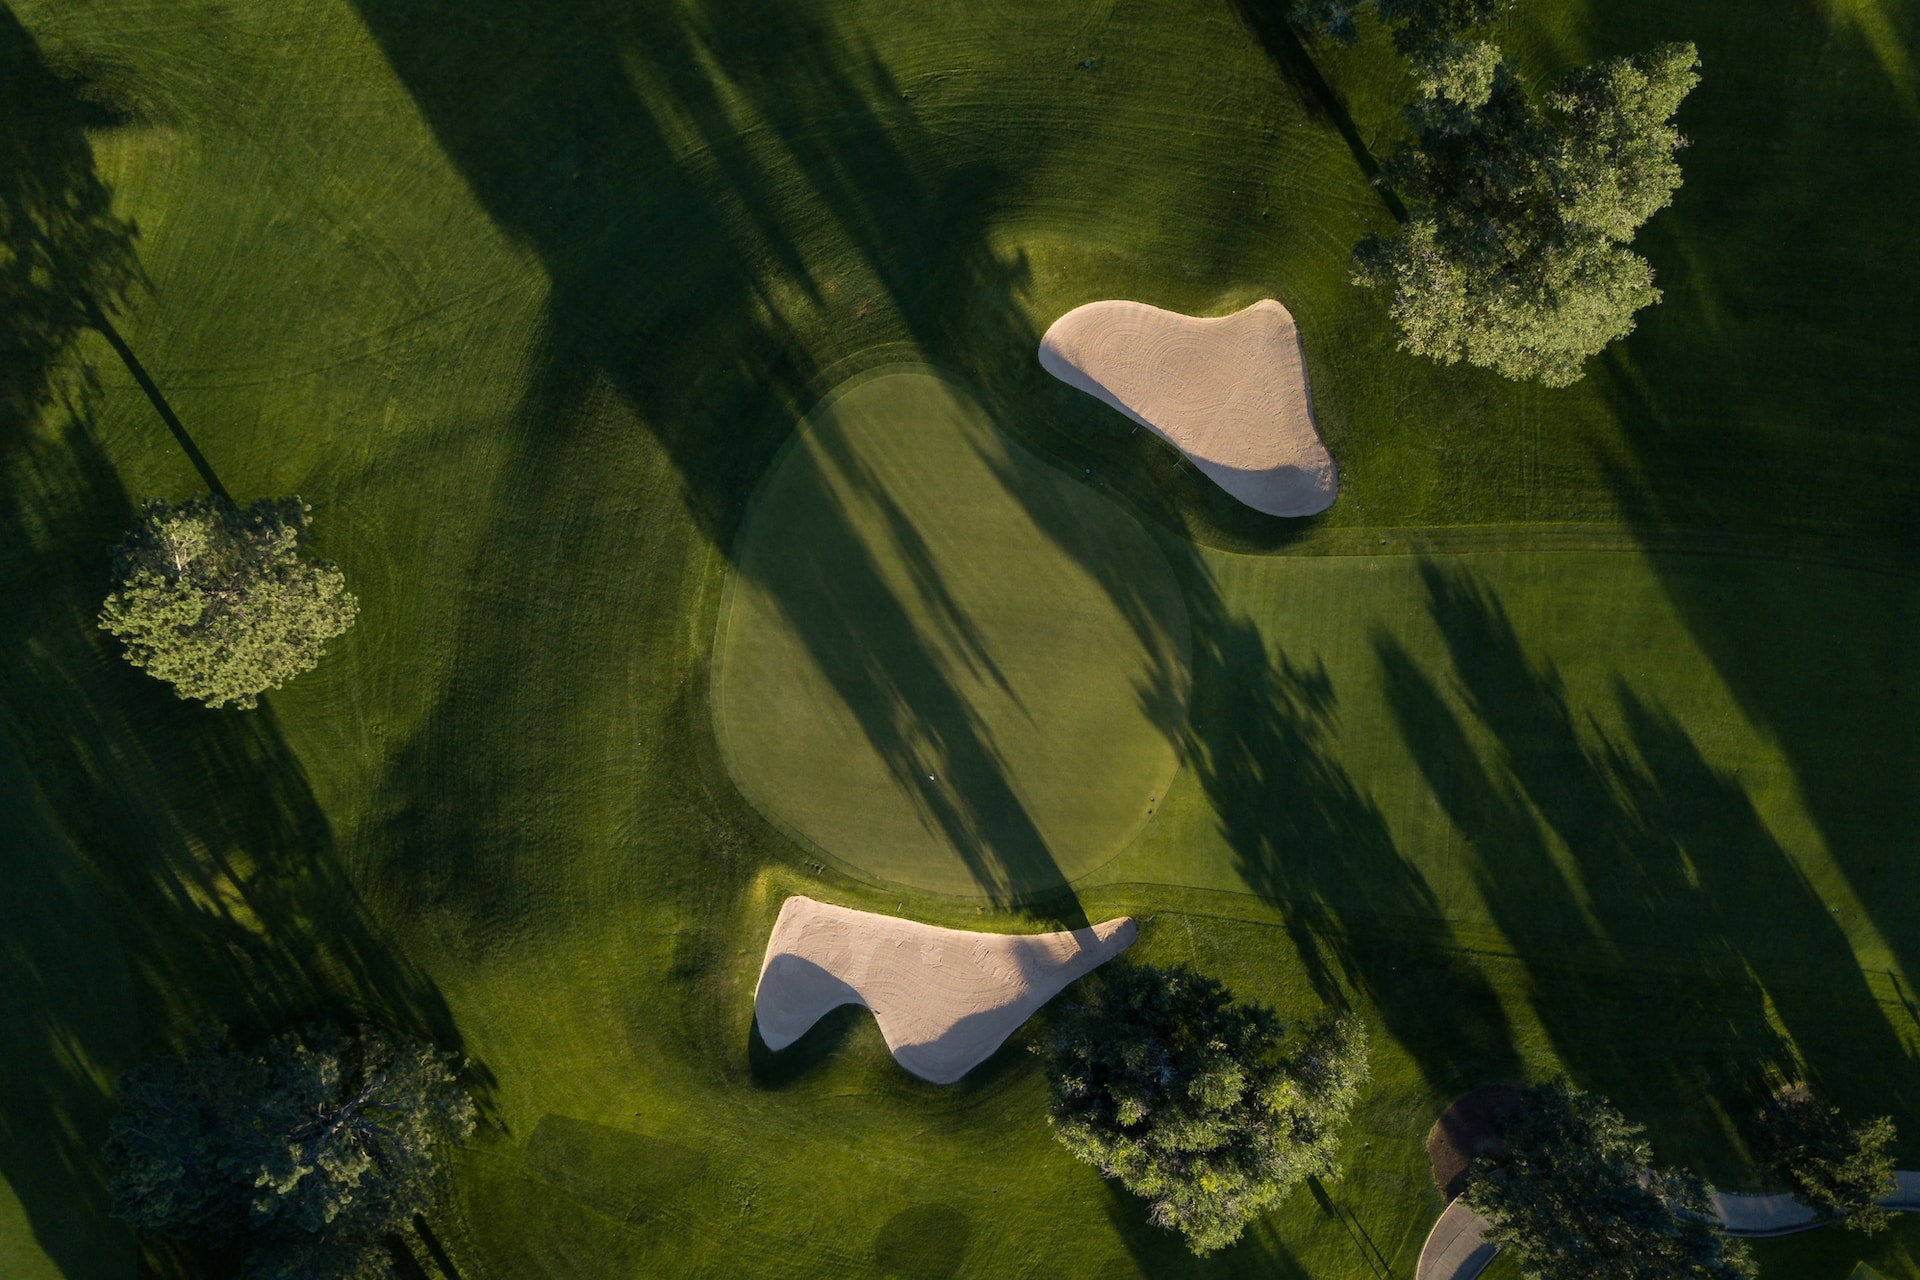 A Bird's eye view of the green of a golf course with bunkers on each side